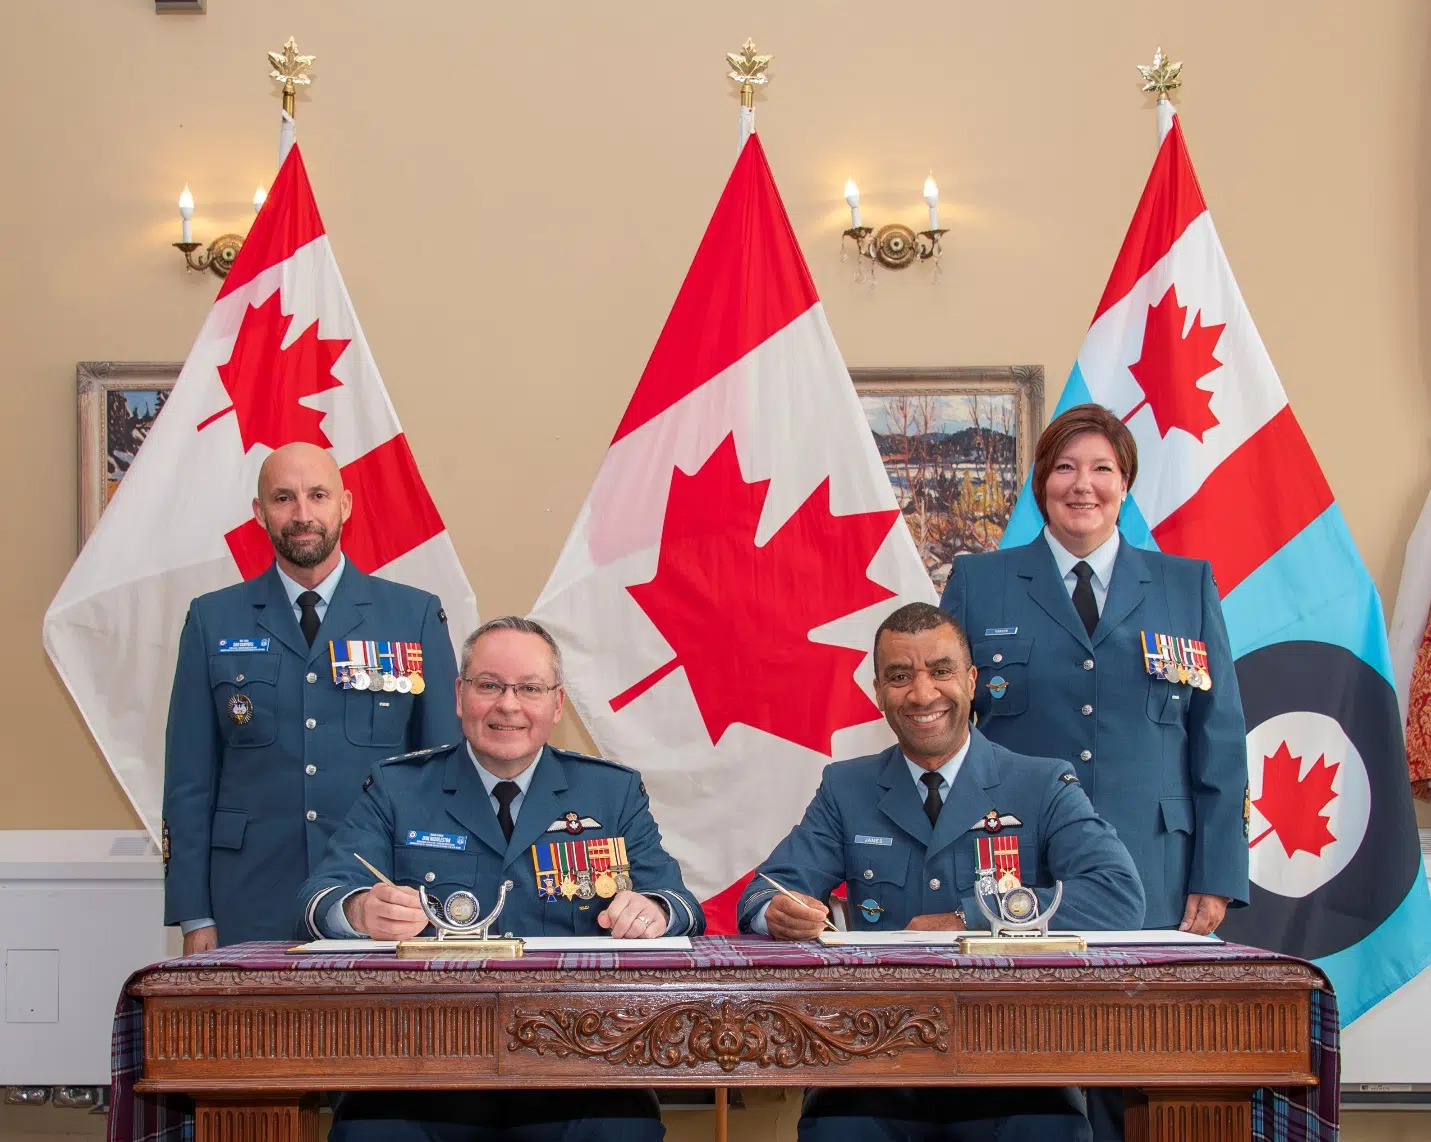 New Commander for 8 Wing Trenton introduced